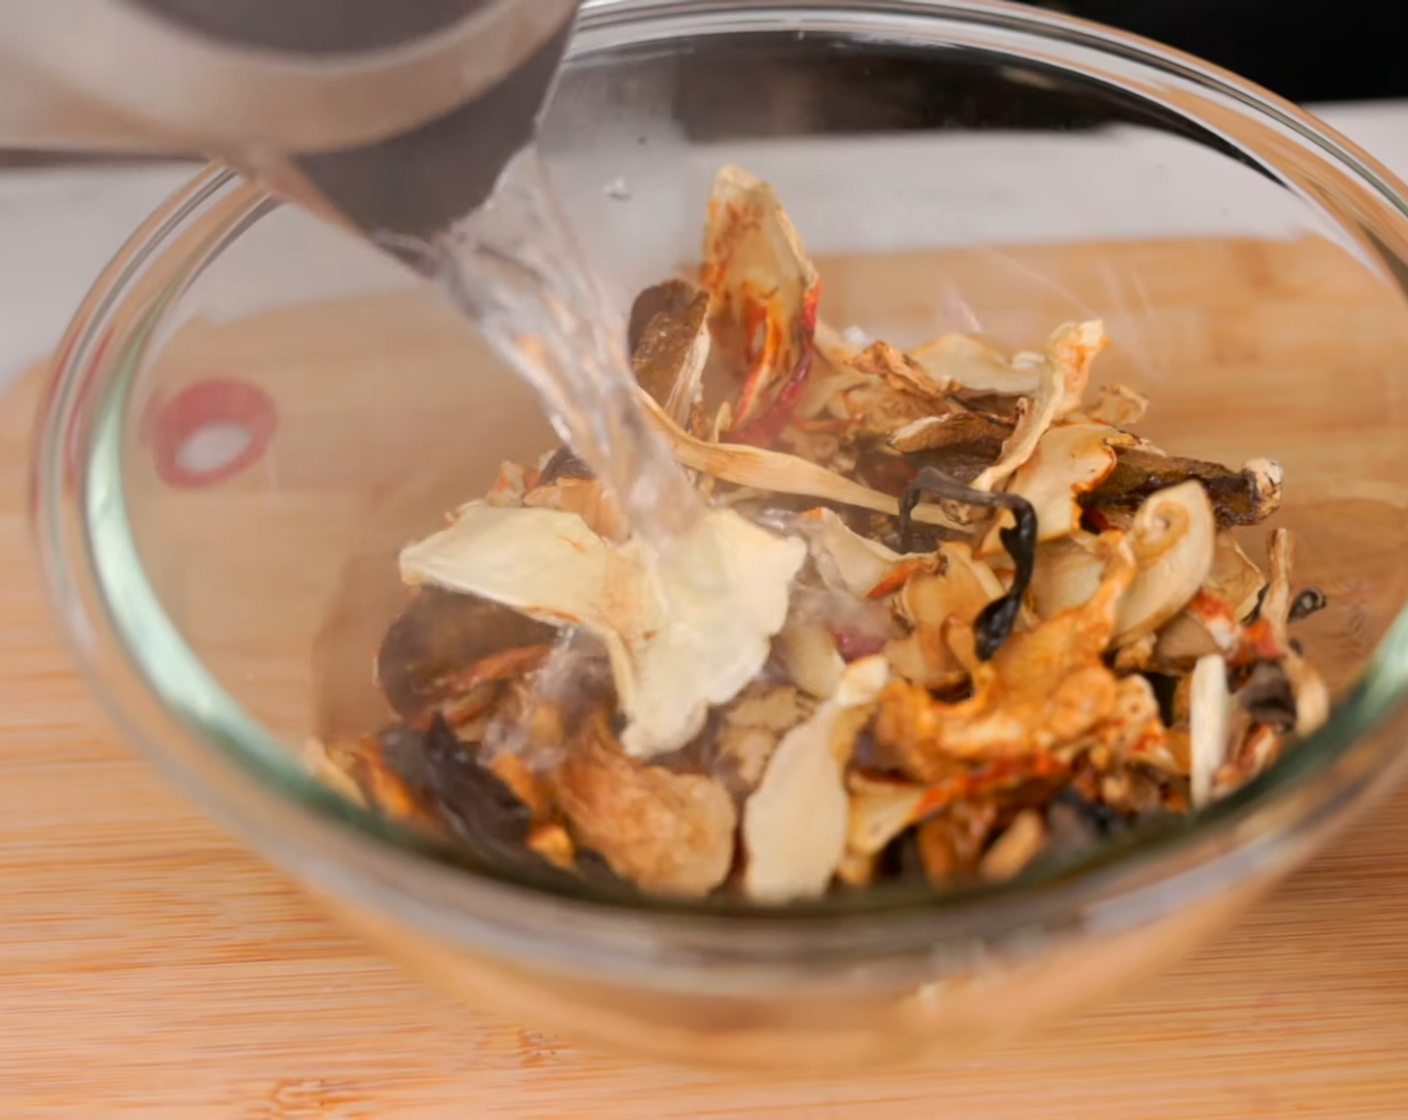 step 4 Place Dried Morel Mushrooms (1 pckg) in a bowl and pour hot water over top. Let mushrooms hydrate for 10 minutes.